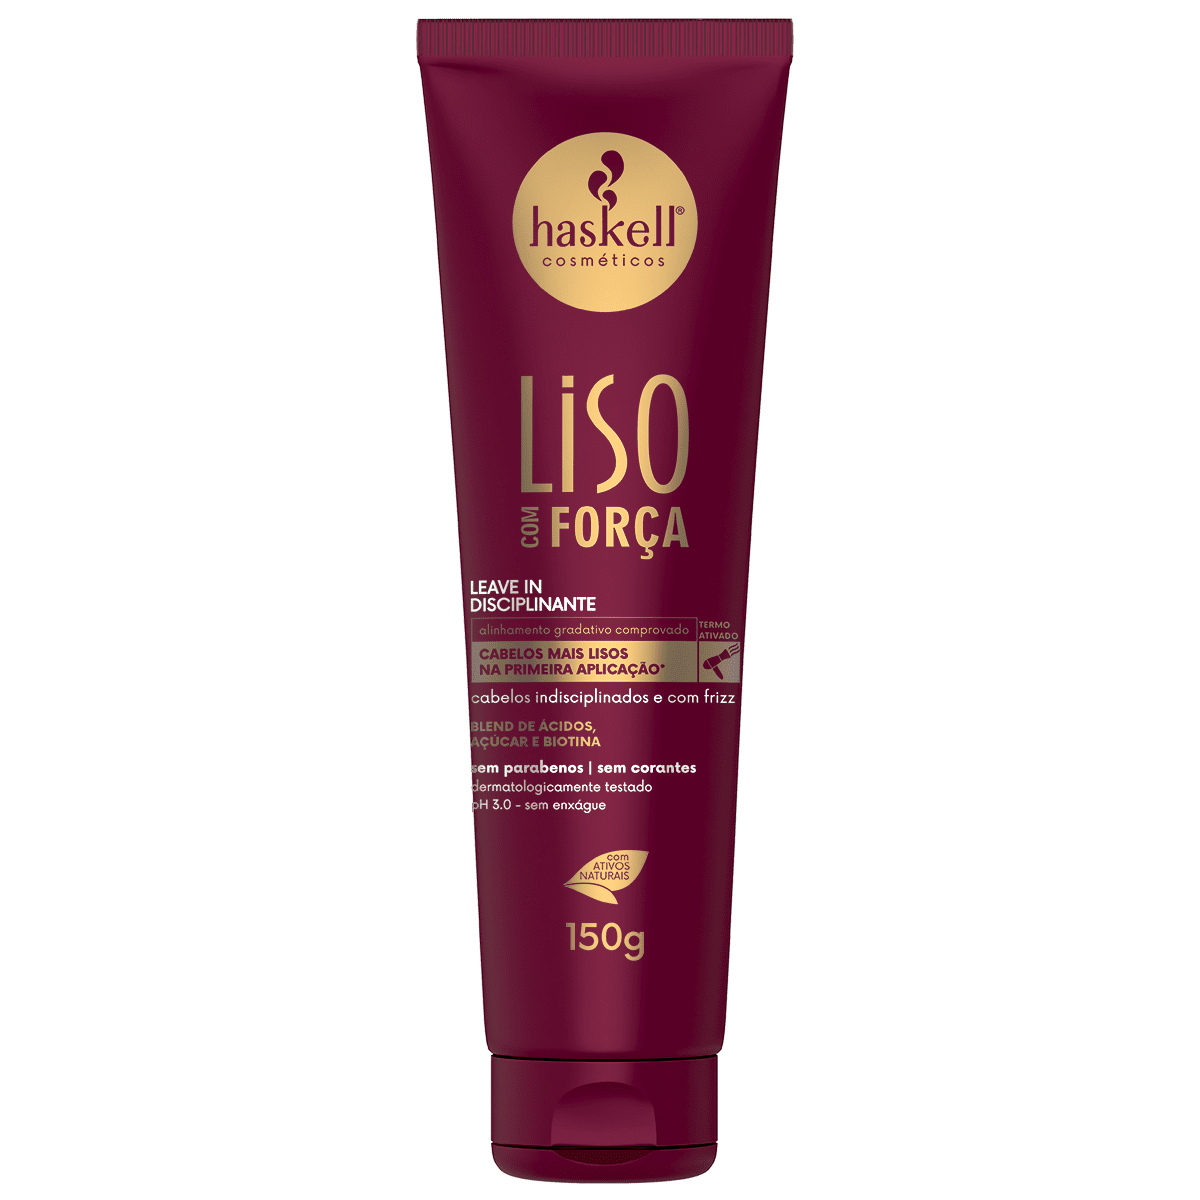 LEAVE IN DISCIPLINANTE HASKELL LISO COM FORÇA 150g 